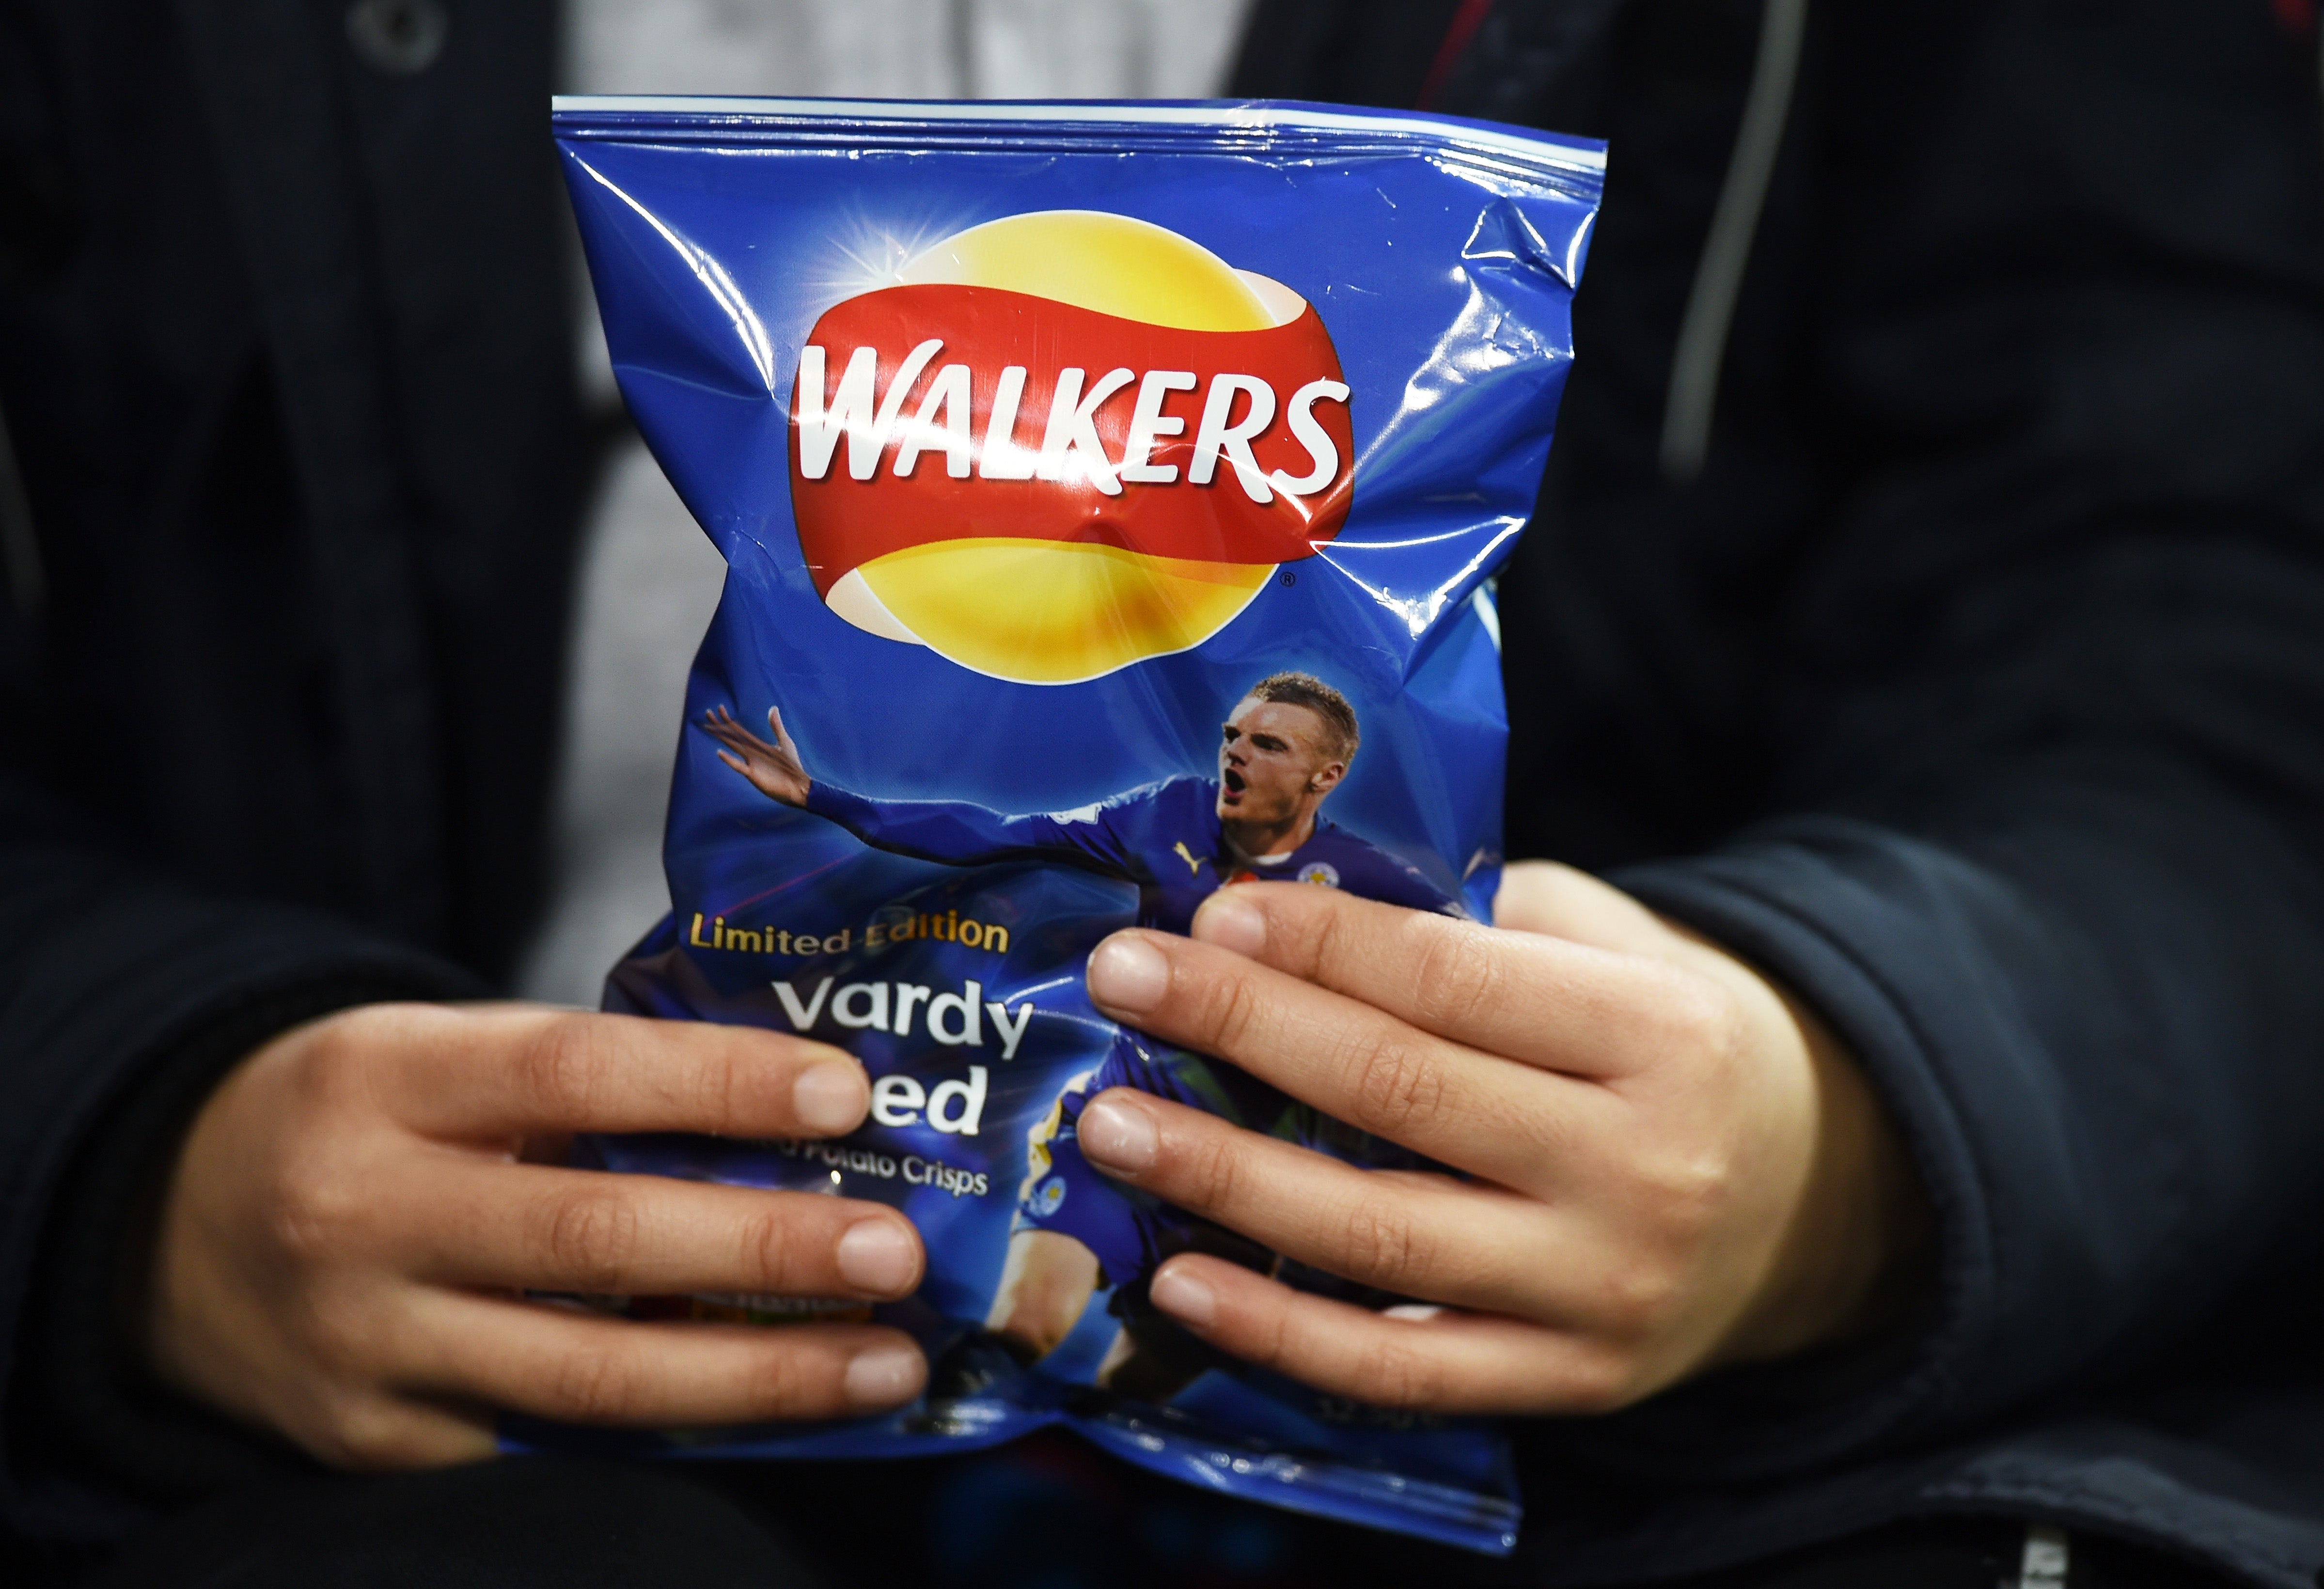 Walkers also aims to make all its packaging 100 per cent recyclable, compostable or biodegradable by 2025